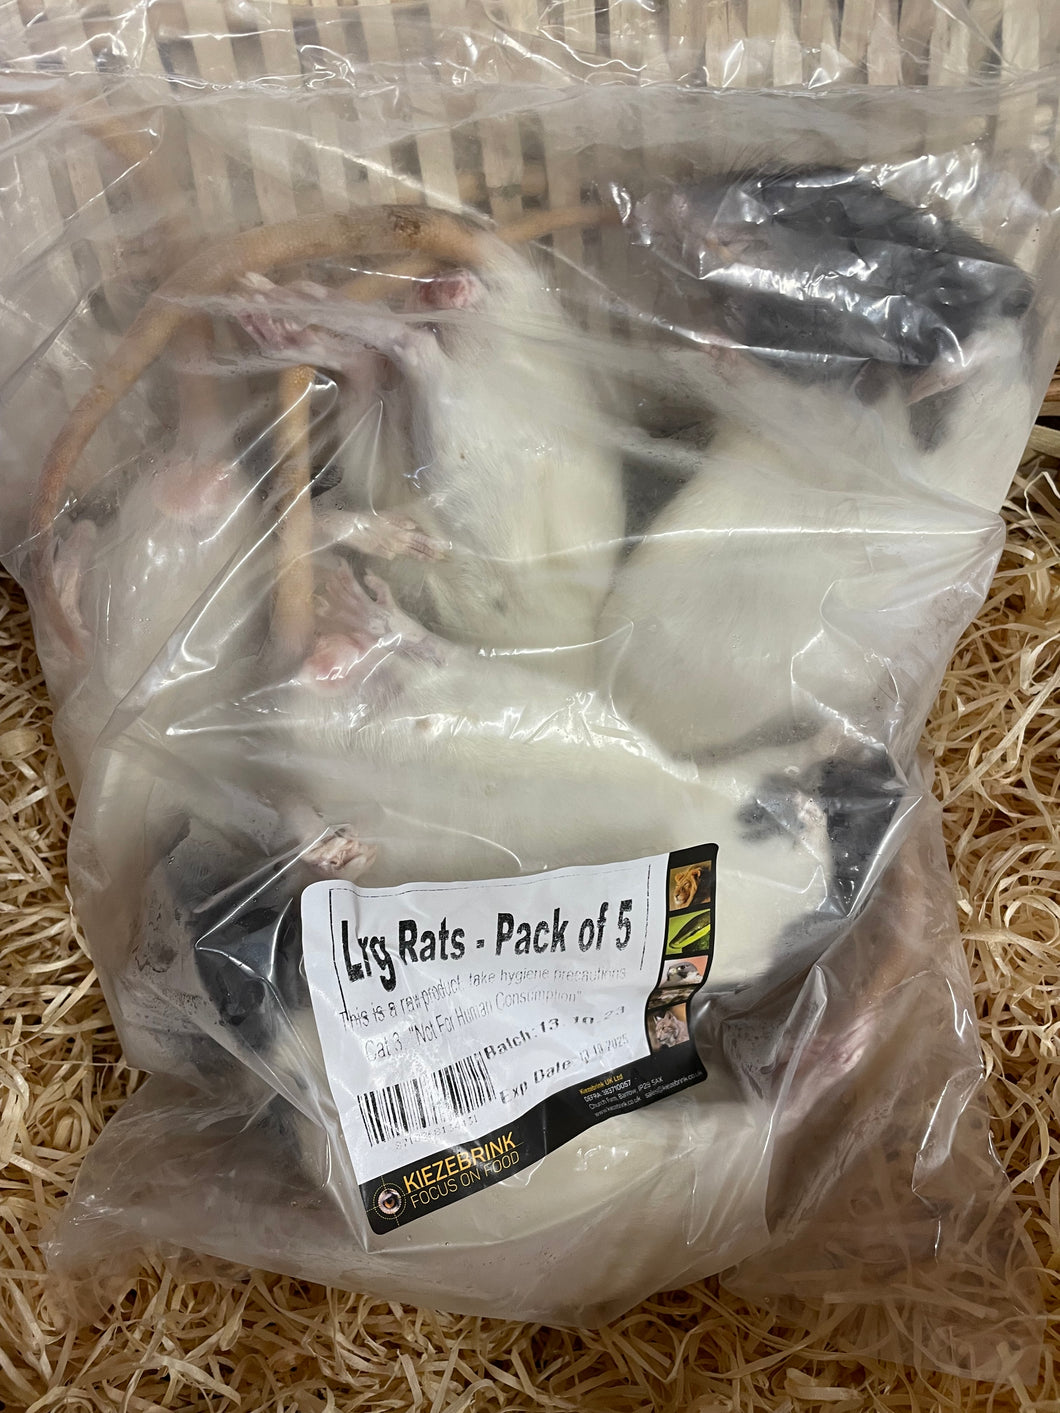 Rats - Large (250-350g each) - Pack of 5.  Whole Prey.